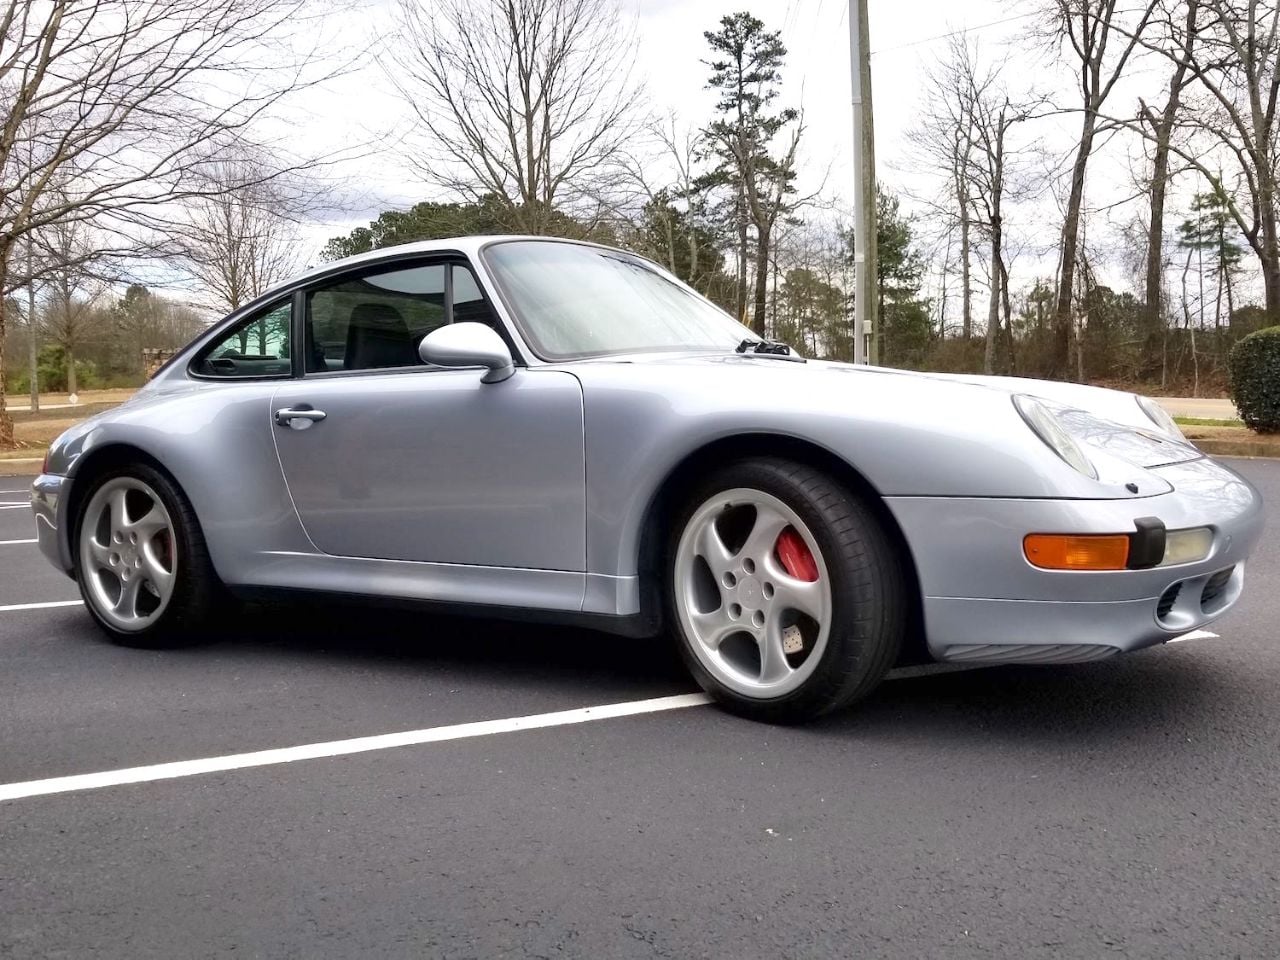 1996 Porsche 911 - 1996 Porsche 993 C4S 6 speed, for sale or trade - Used - VIN WPOAA2992TS323201 - 63,811 Miles - 6 cyl - 4WD - Manual - Coupe - Blue - Santa Rosa Beach, FL 32459, United States